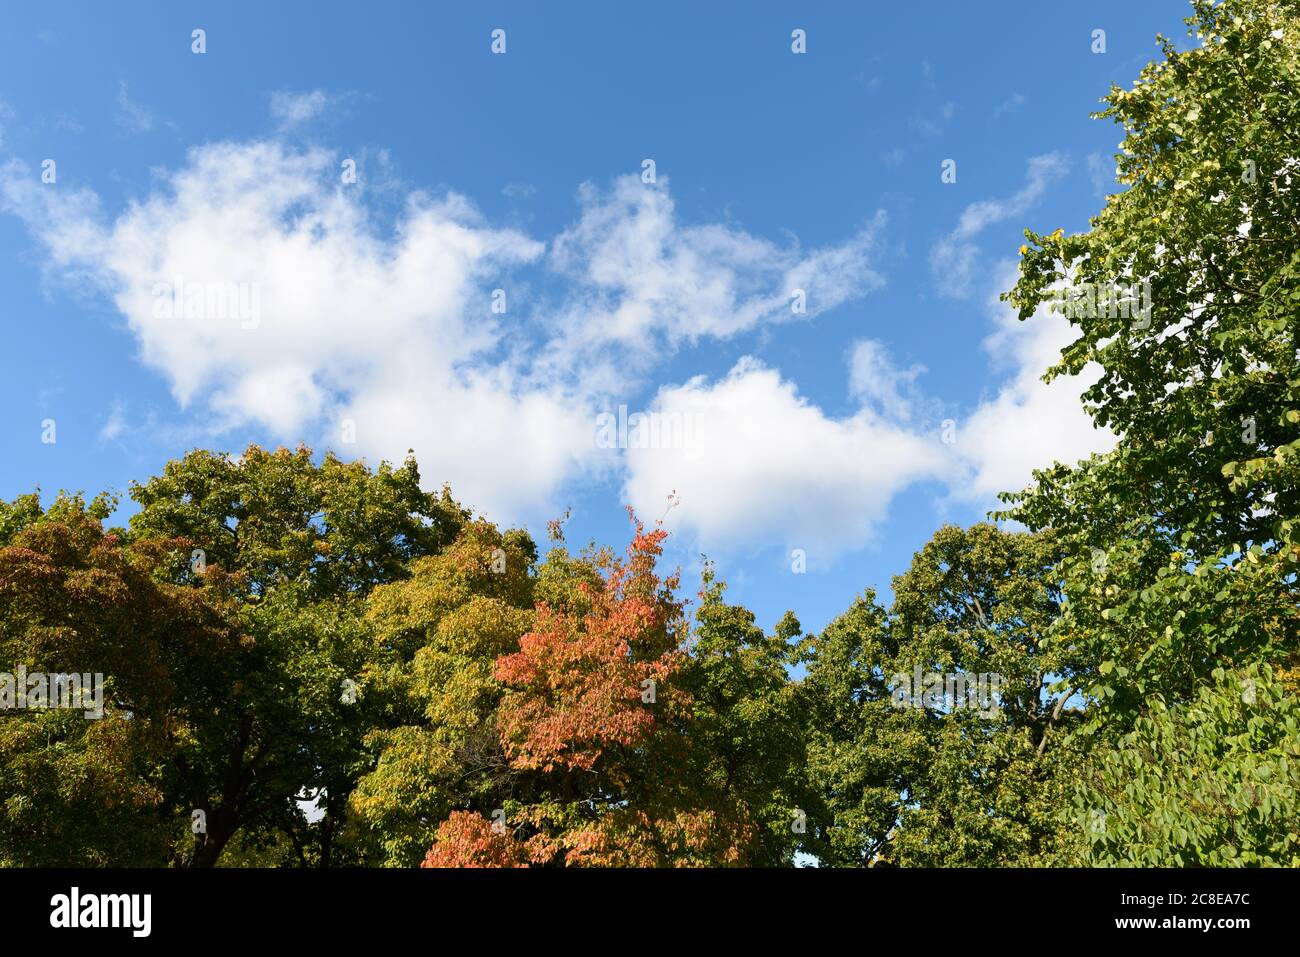 Peaceful view of tall healthy trees against light fluffy clouds in clear blue sky Stock Photo